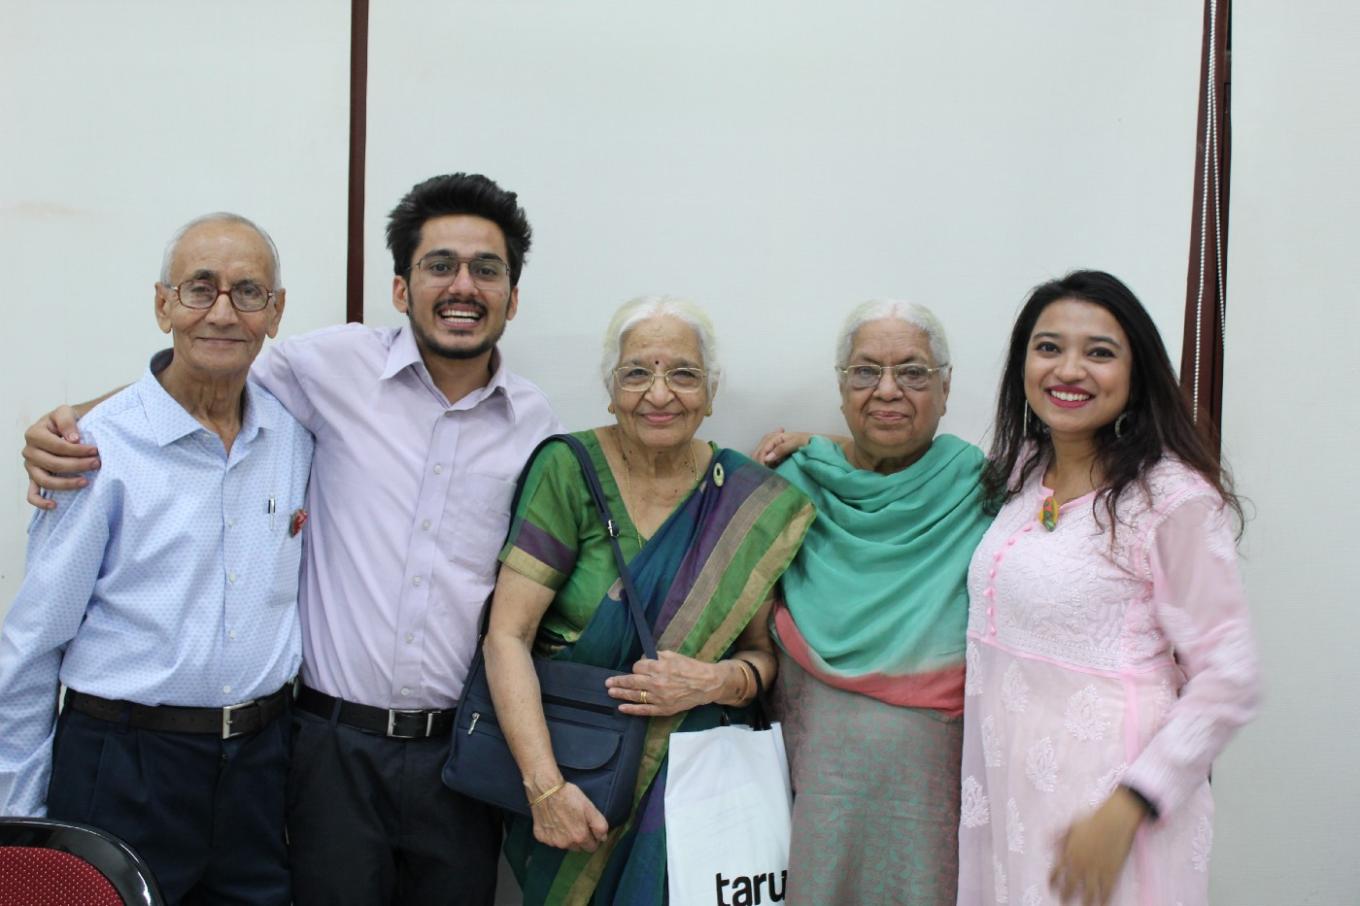 Grey Shades Co-Founders Inderpreet Singh and Wyonna D’souza with fellows at a senior care home in Punjab